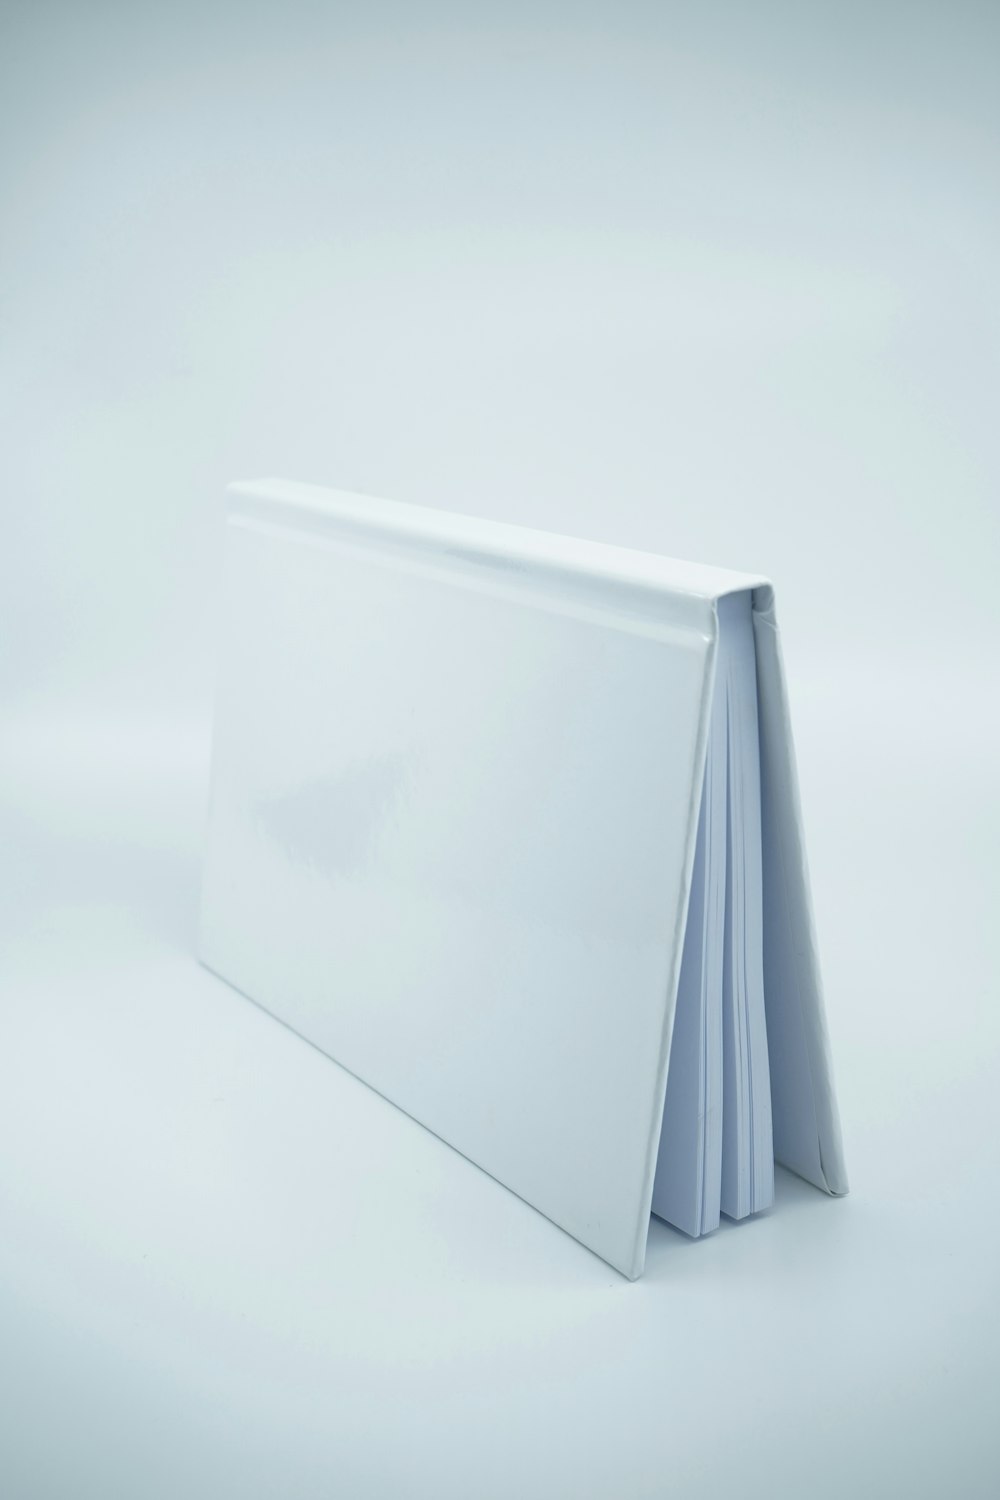 white paper on white surface